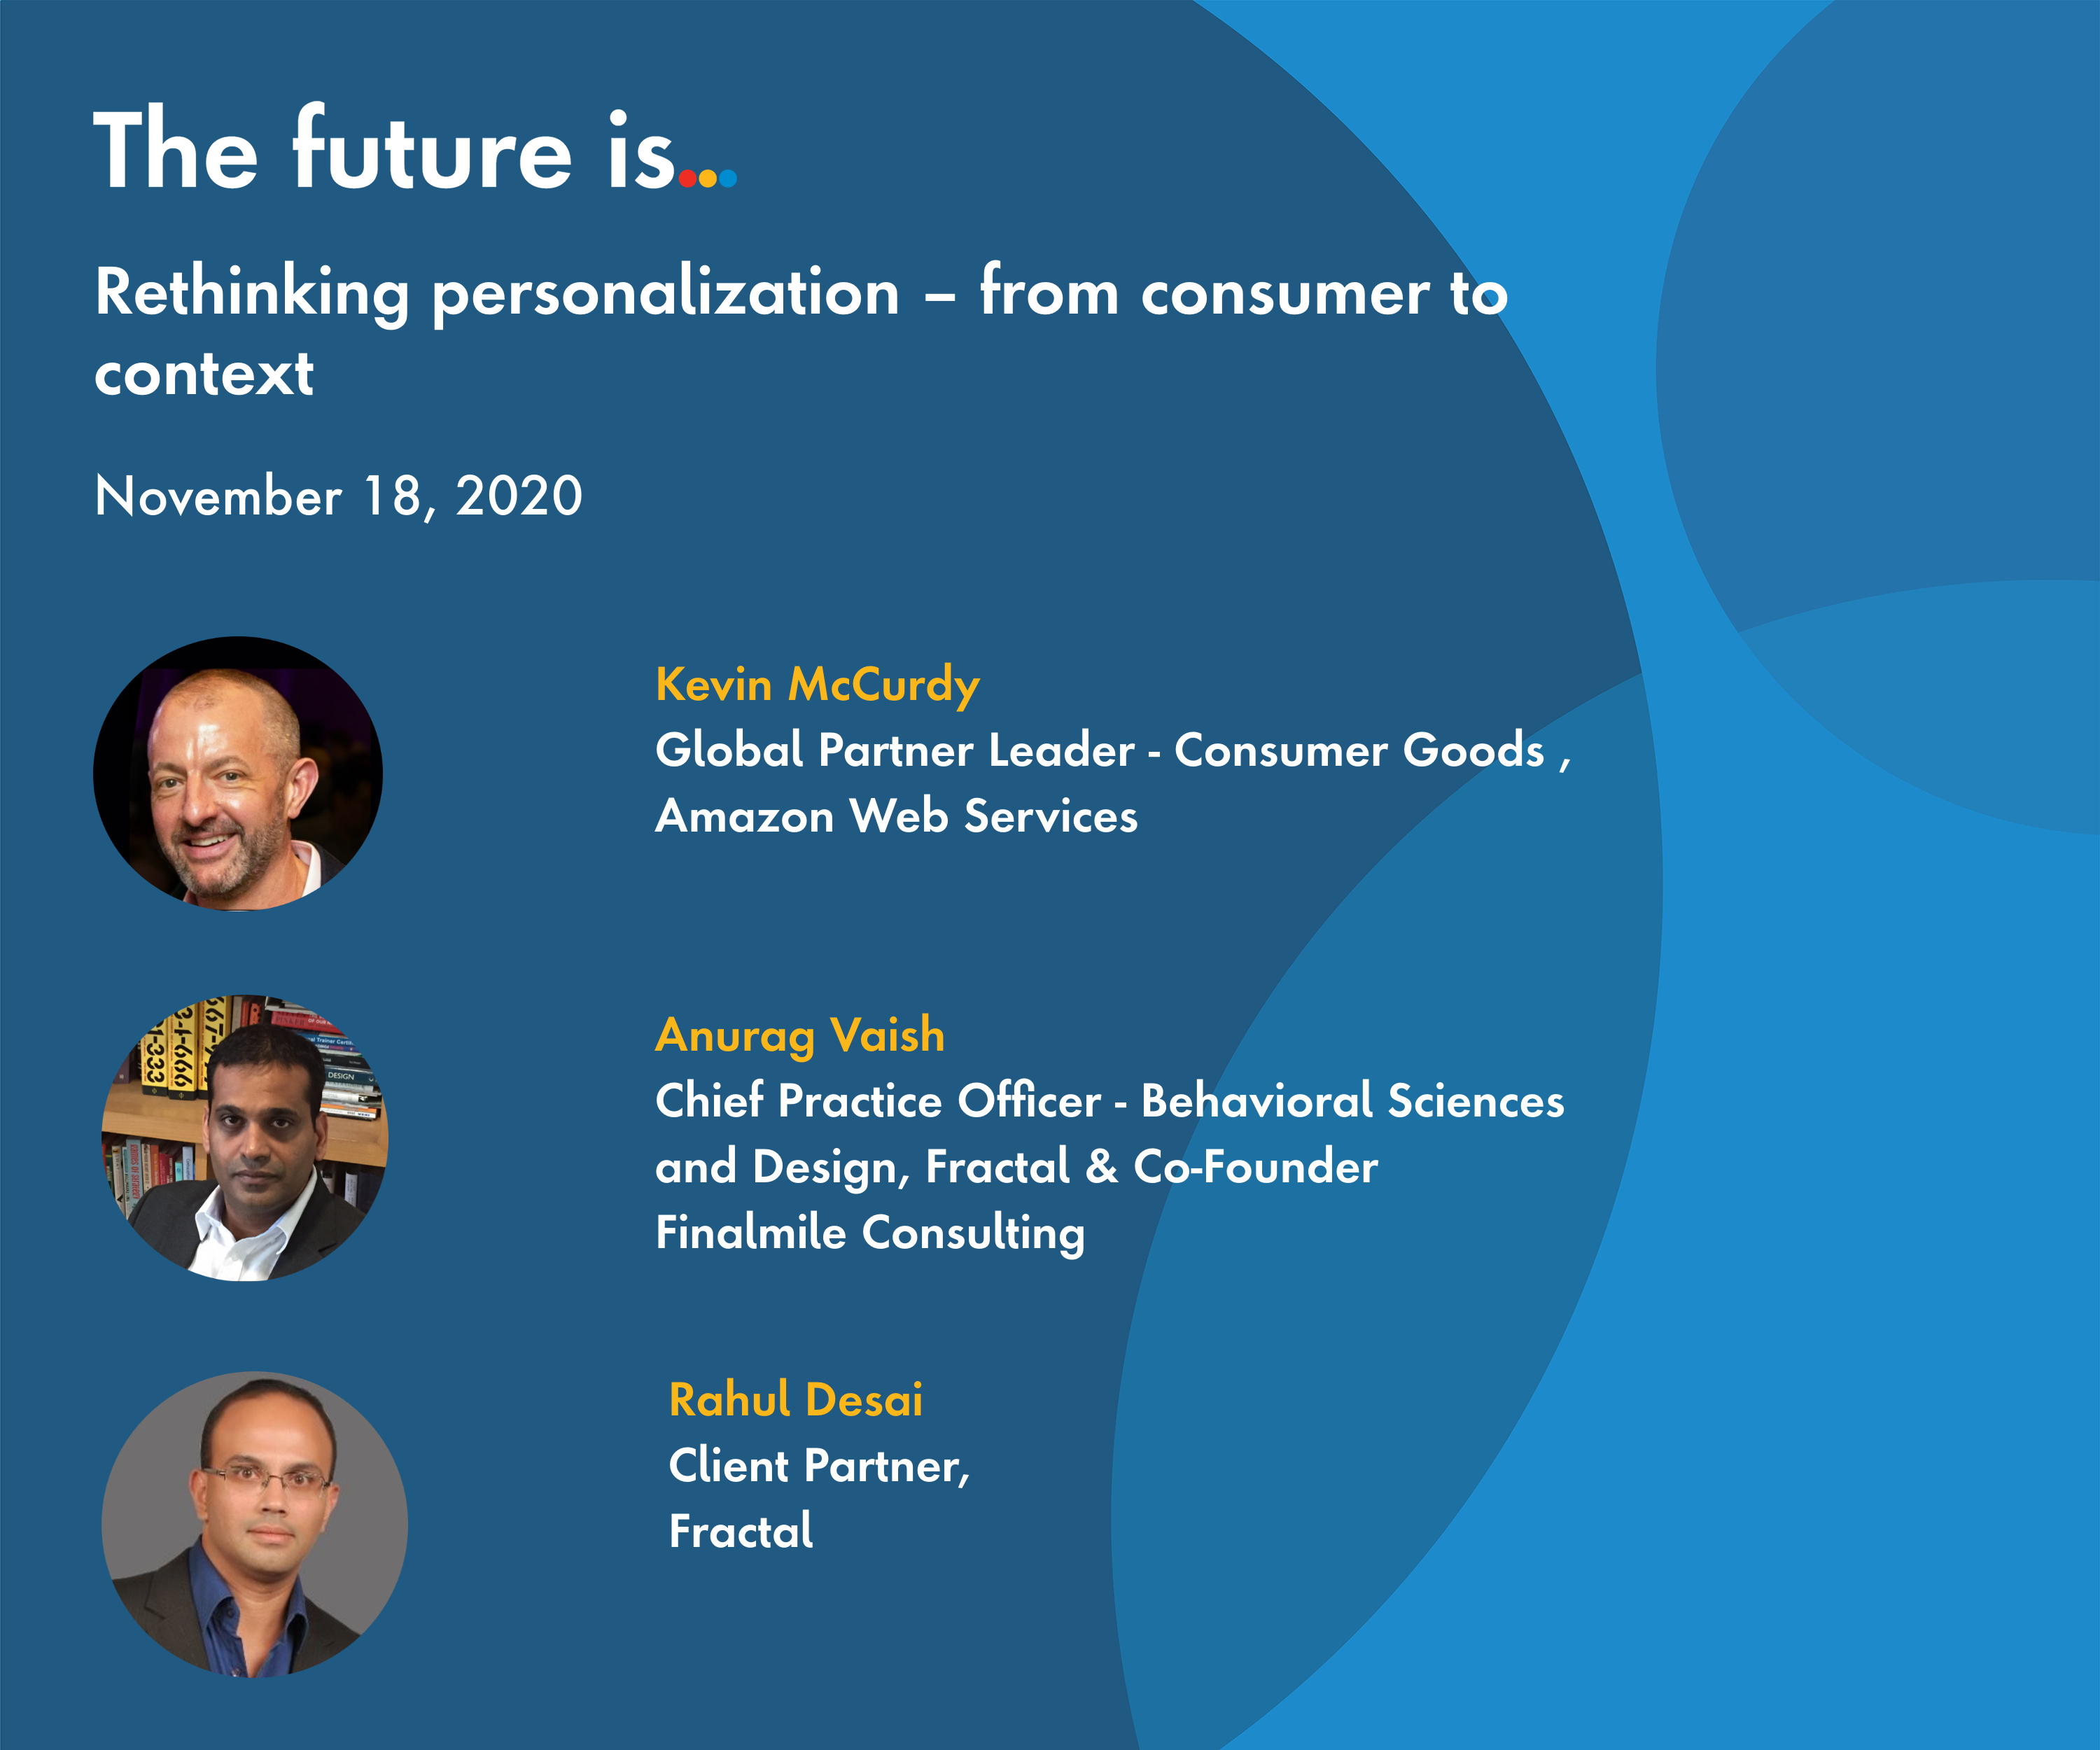 Rethinking personalization – from consumer to context